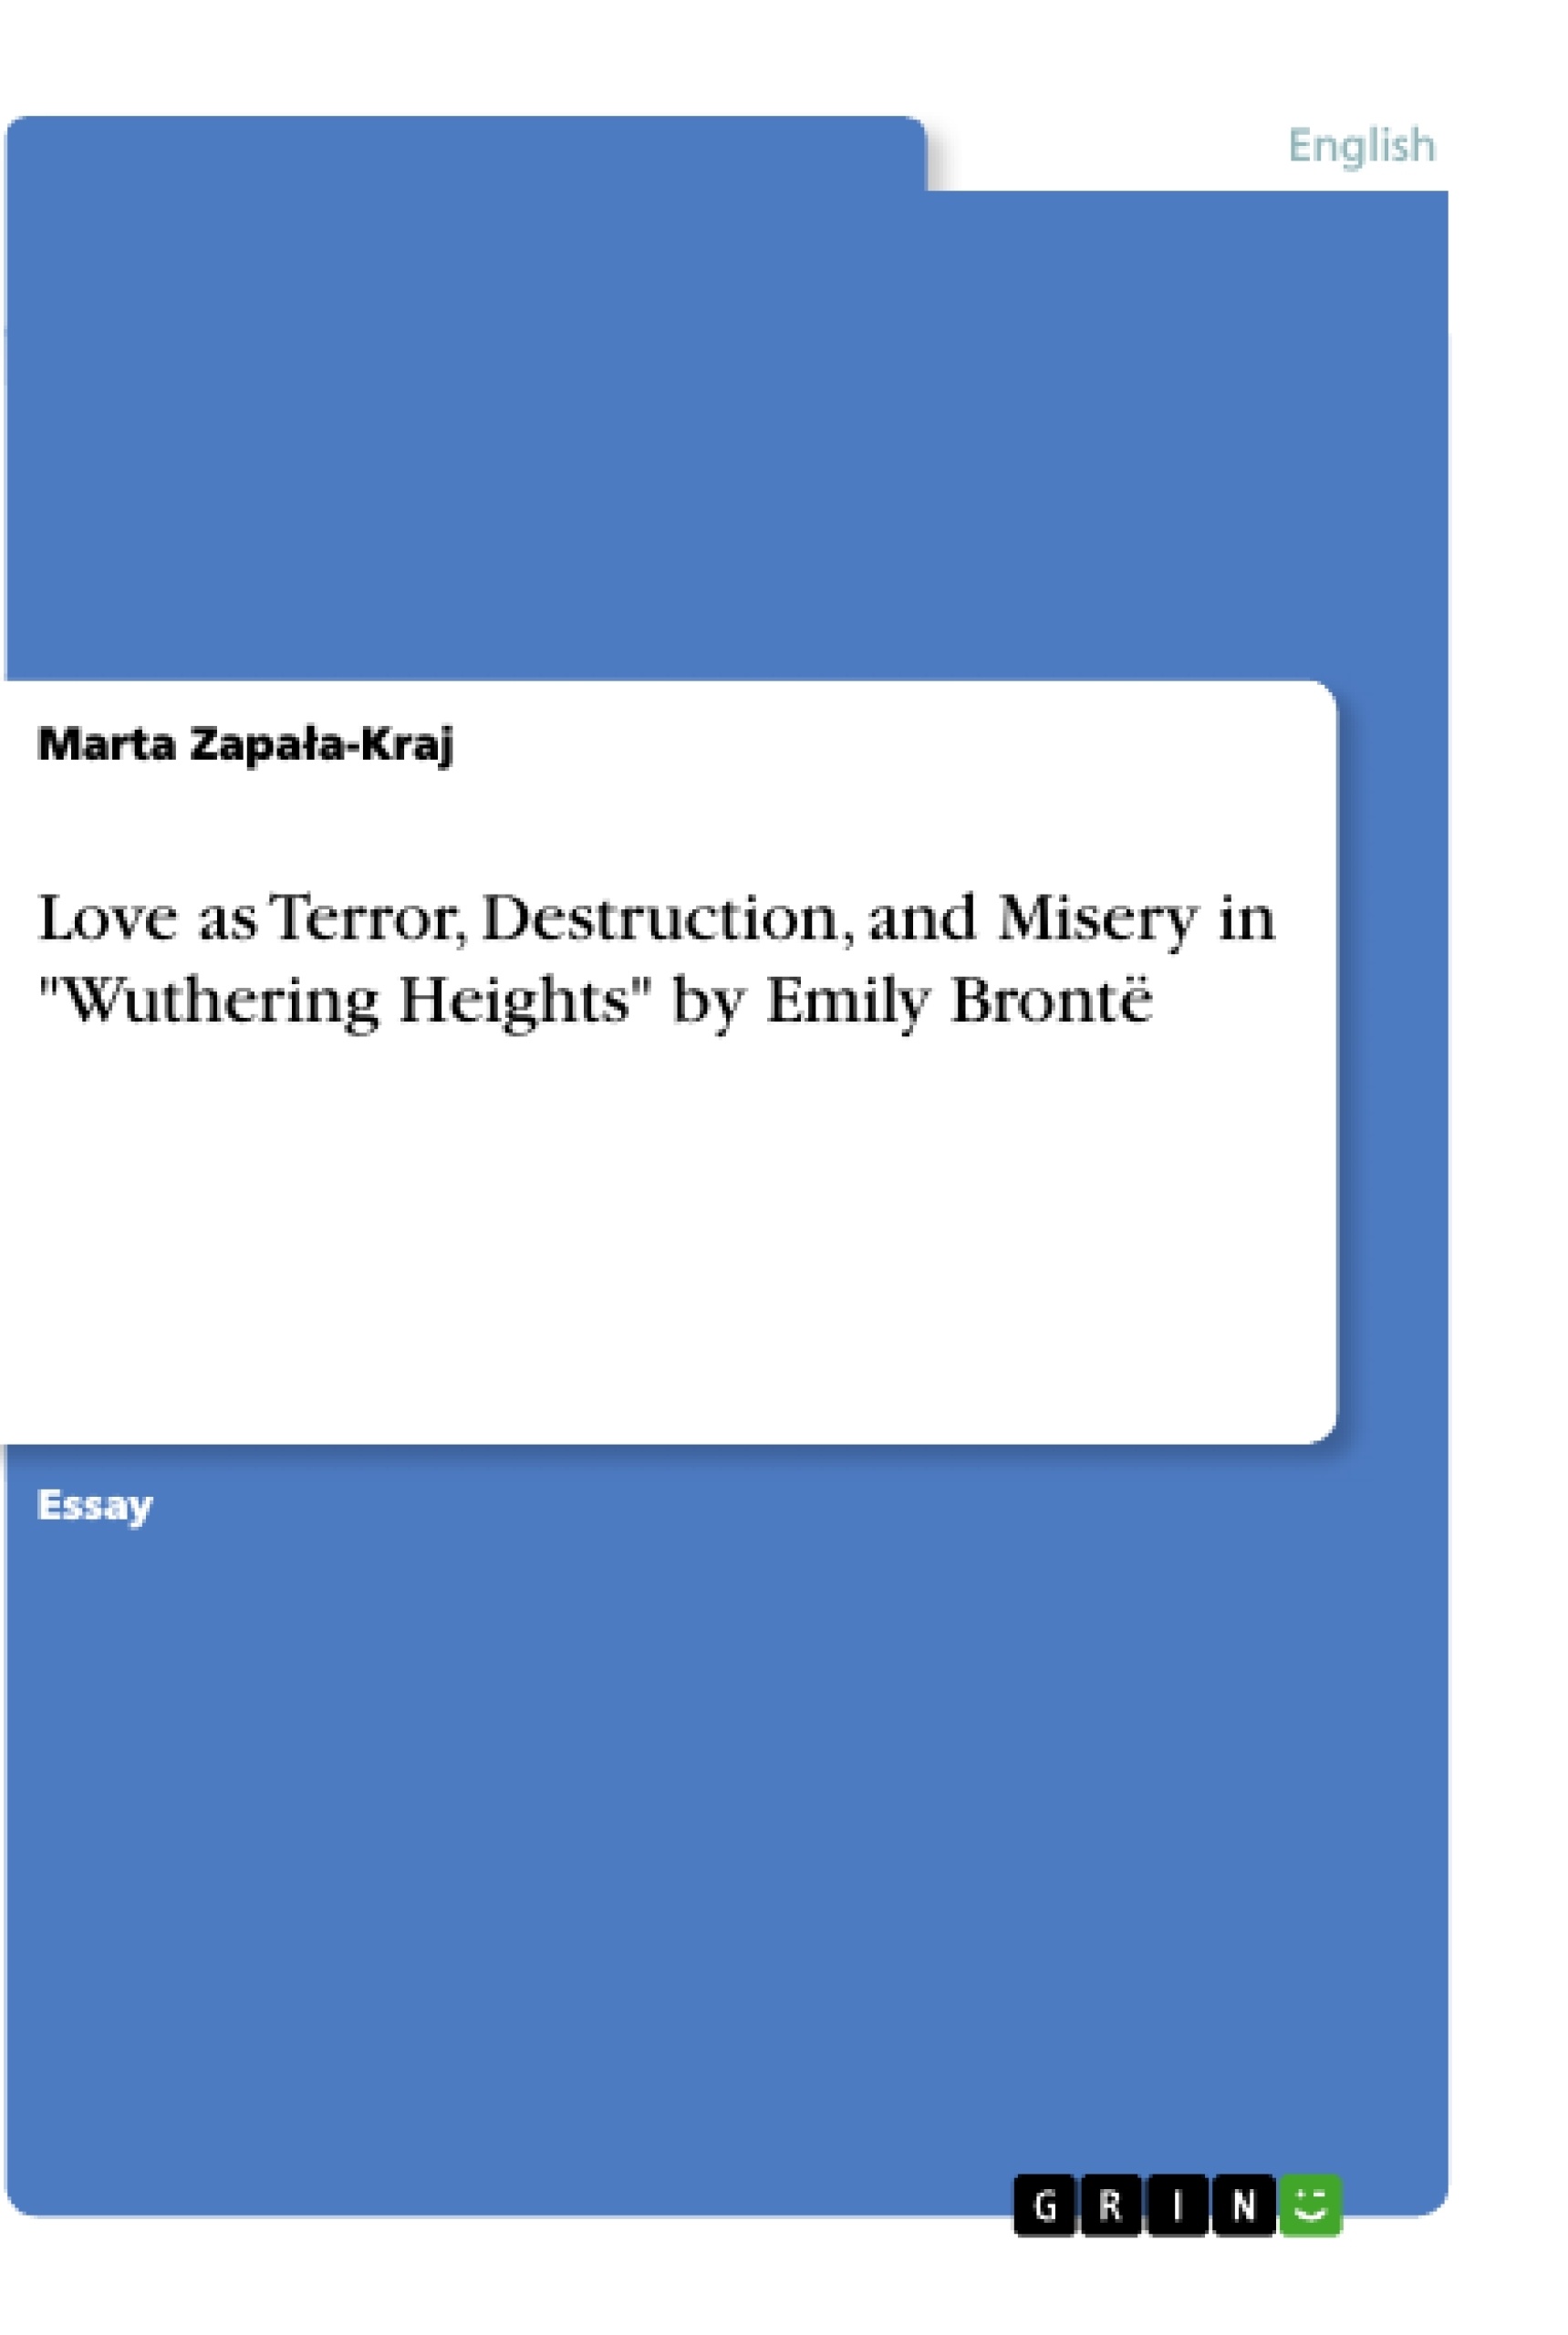 Title: Love as Terror, Destruction, and Misery in "Wuthering Heights" by Emily Brontë